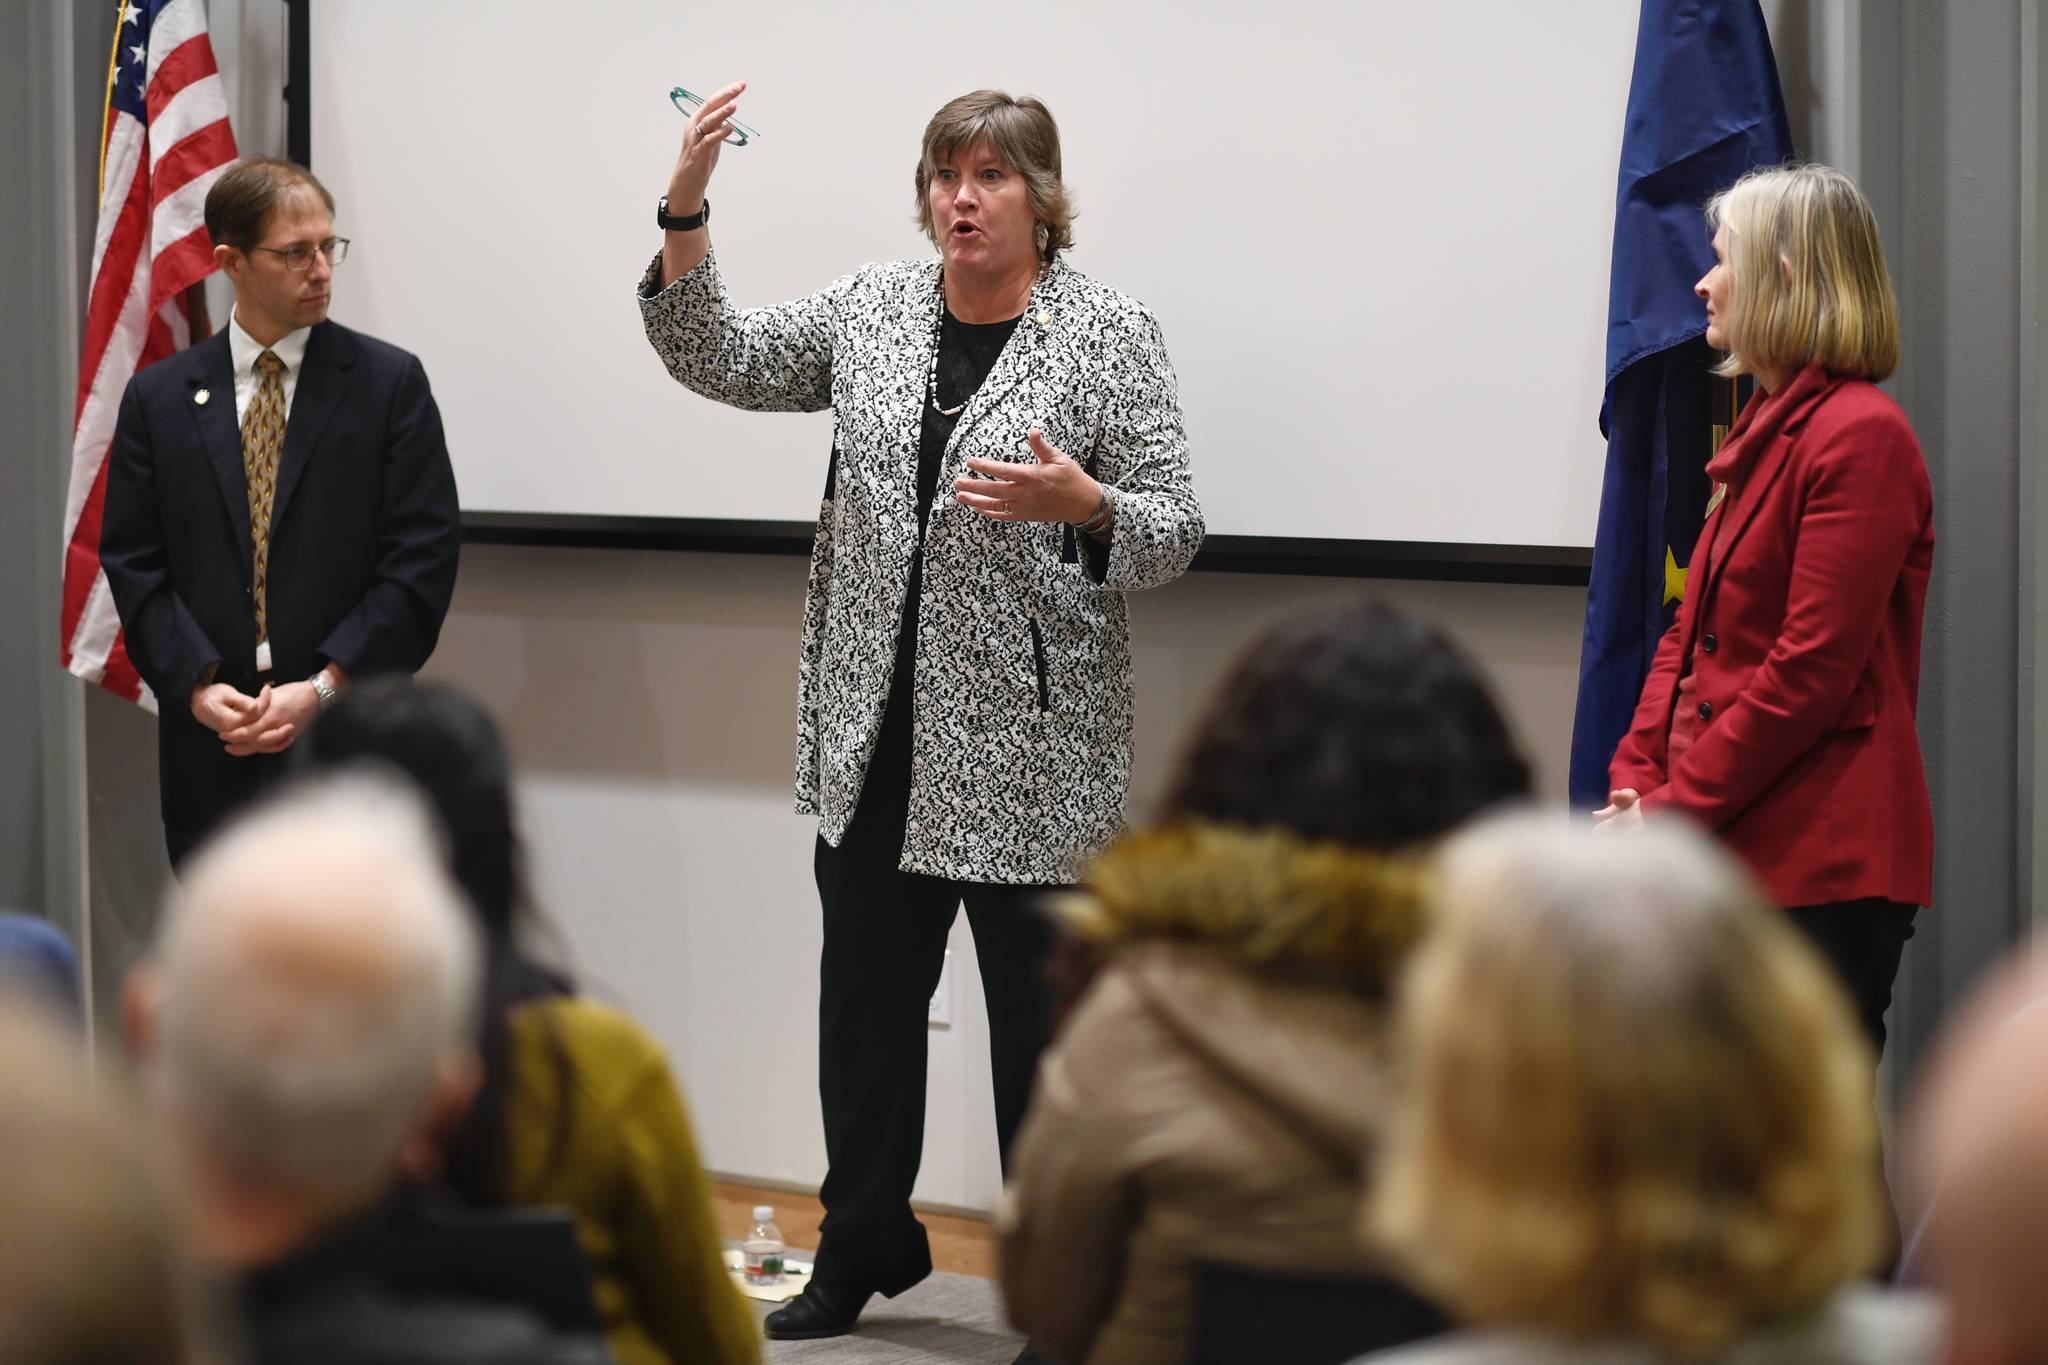 Rep. Sara Hannan, D-Juneau, center, answers a question as Sen. Jesse Kiehl, D-Juneau, left, and Rep. Andi Story, D-Juneau, wait their turn during a standing-room only town hall meeting at the Mendenhall Valley Public Library on Tuesday, Jan. 29, 2019. (Michael Penn | Juneau Empire)